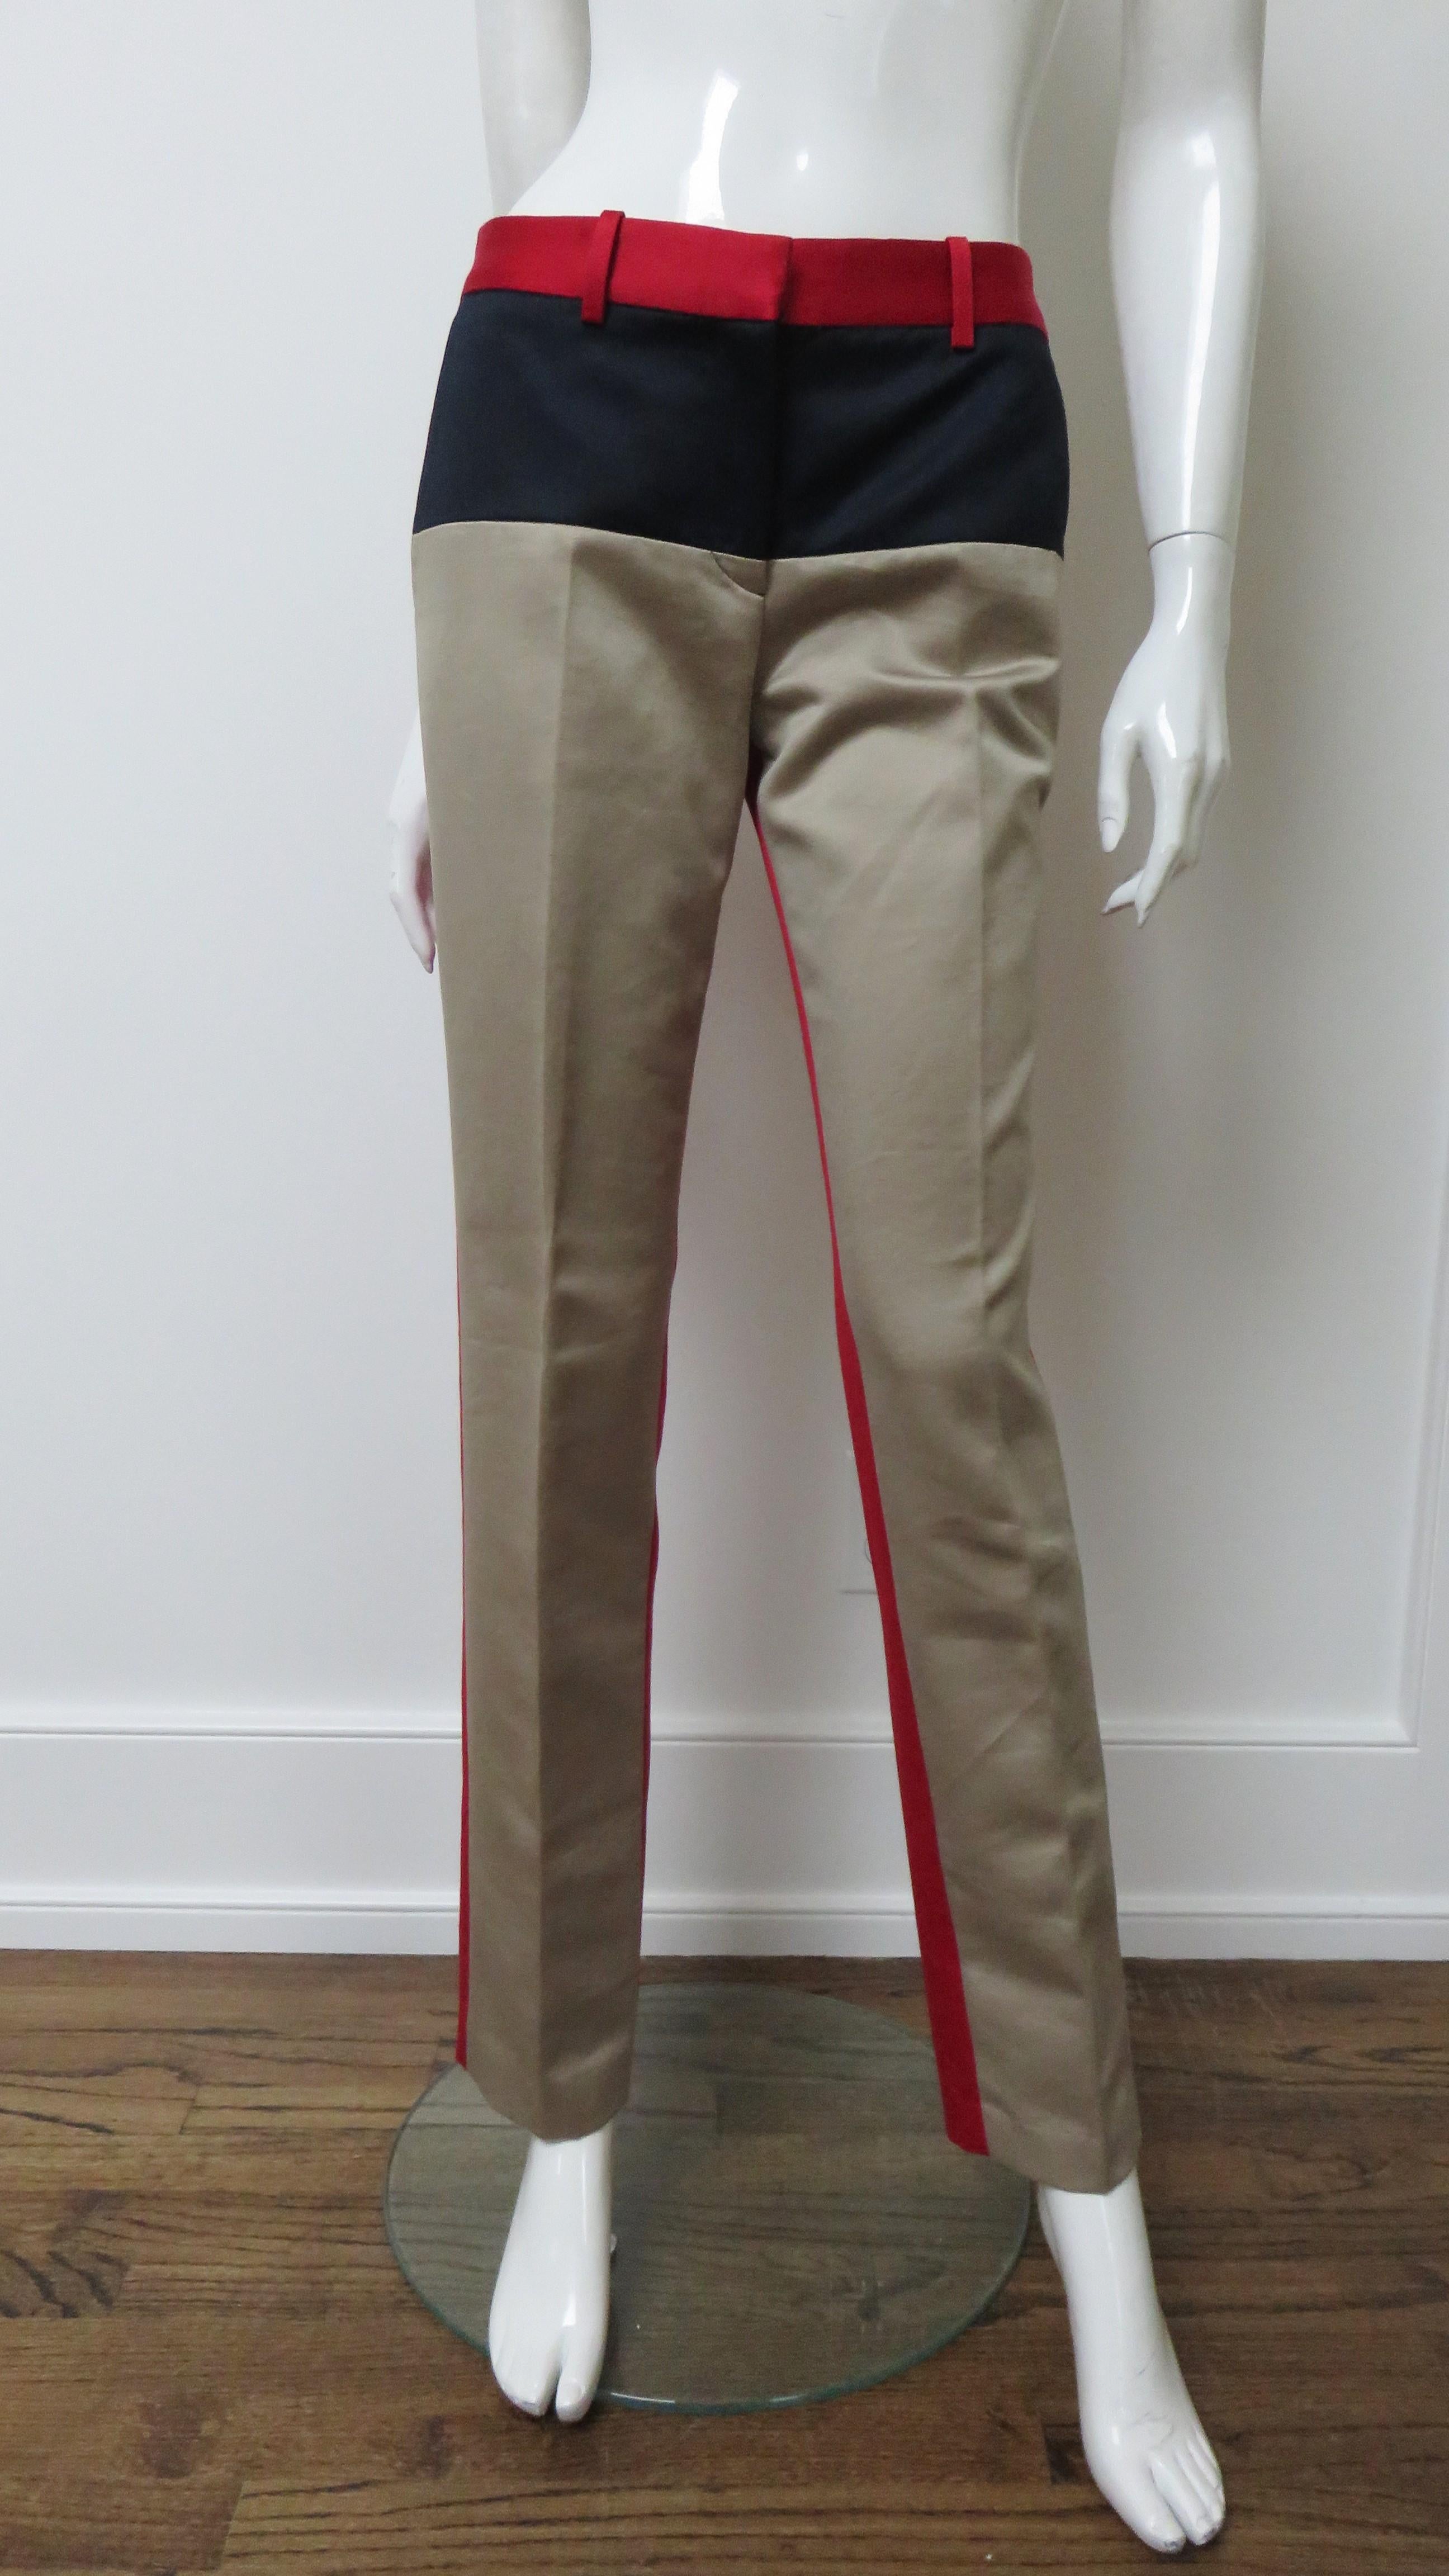 Fabulous red, black and camel taupe polished cotton pants by Michael Kors. They are mid rise with a red waistband, a black panel across the front hips, and taupe front straight legs. The entire back of the pants are solid red. They have front hip